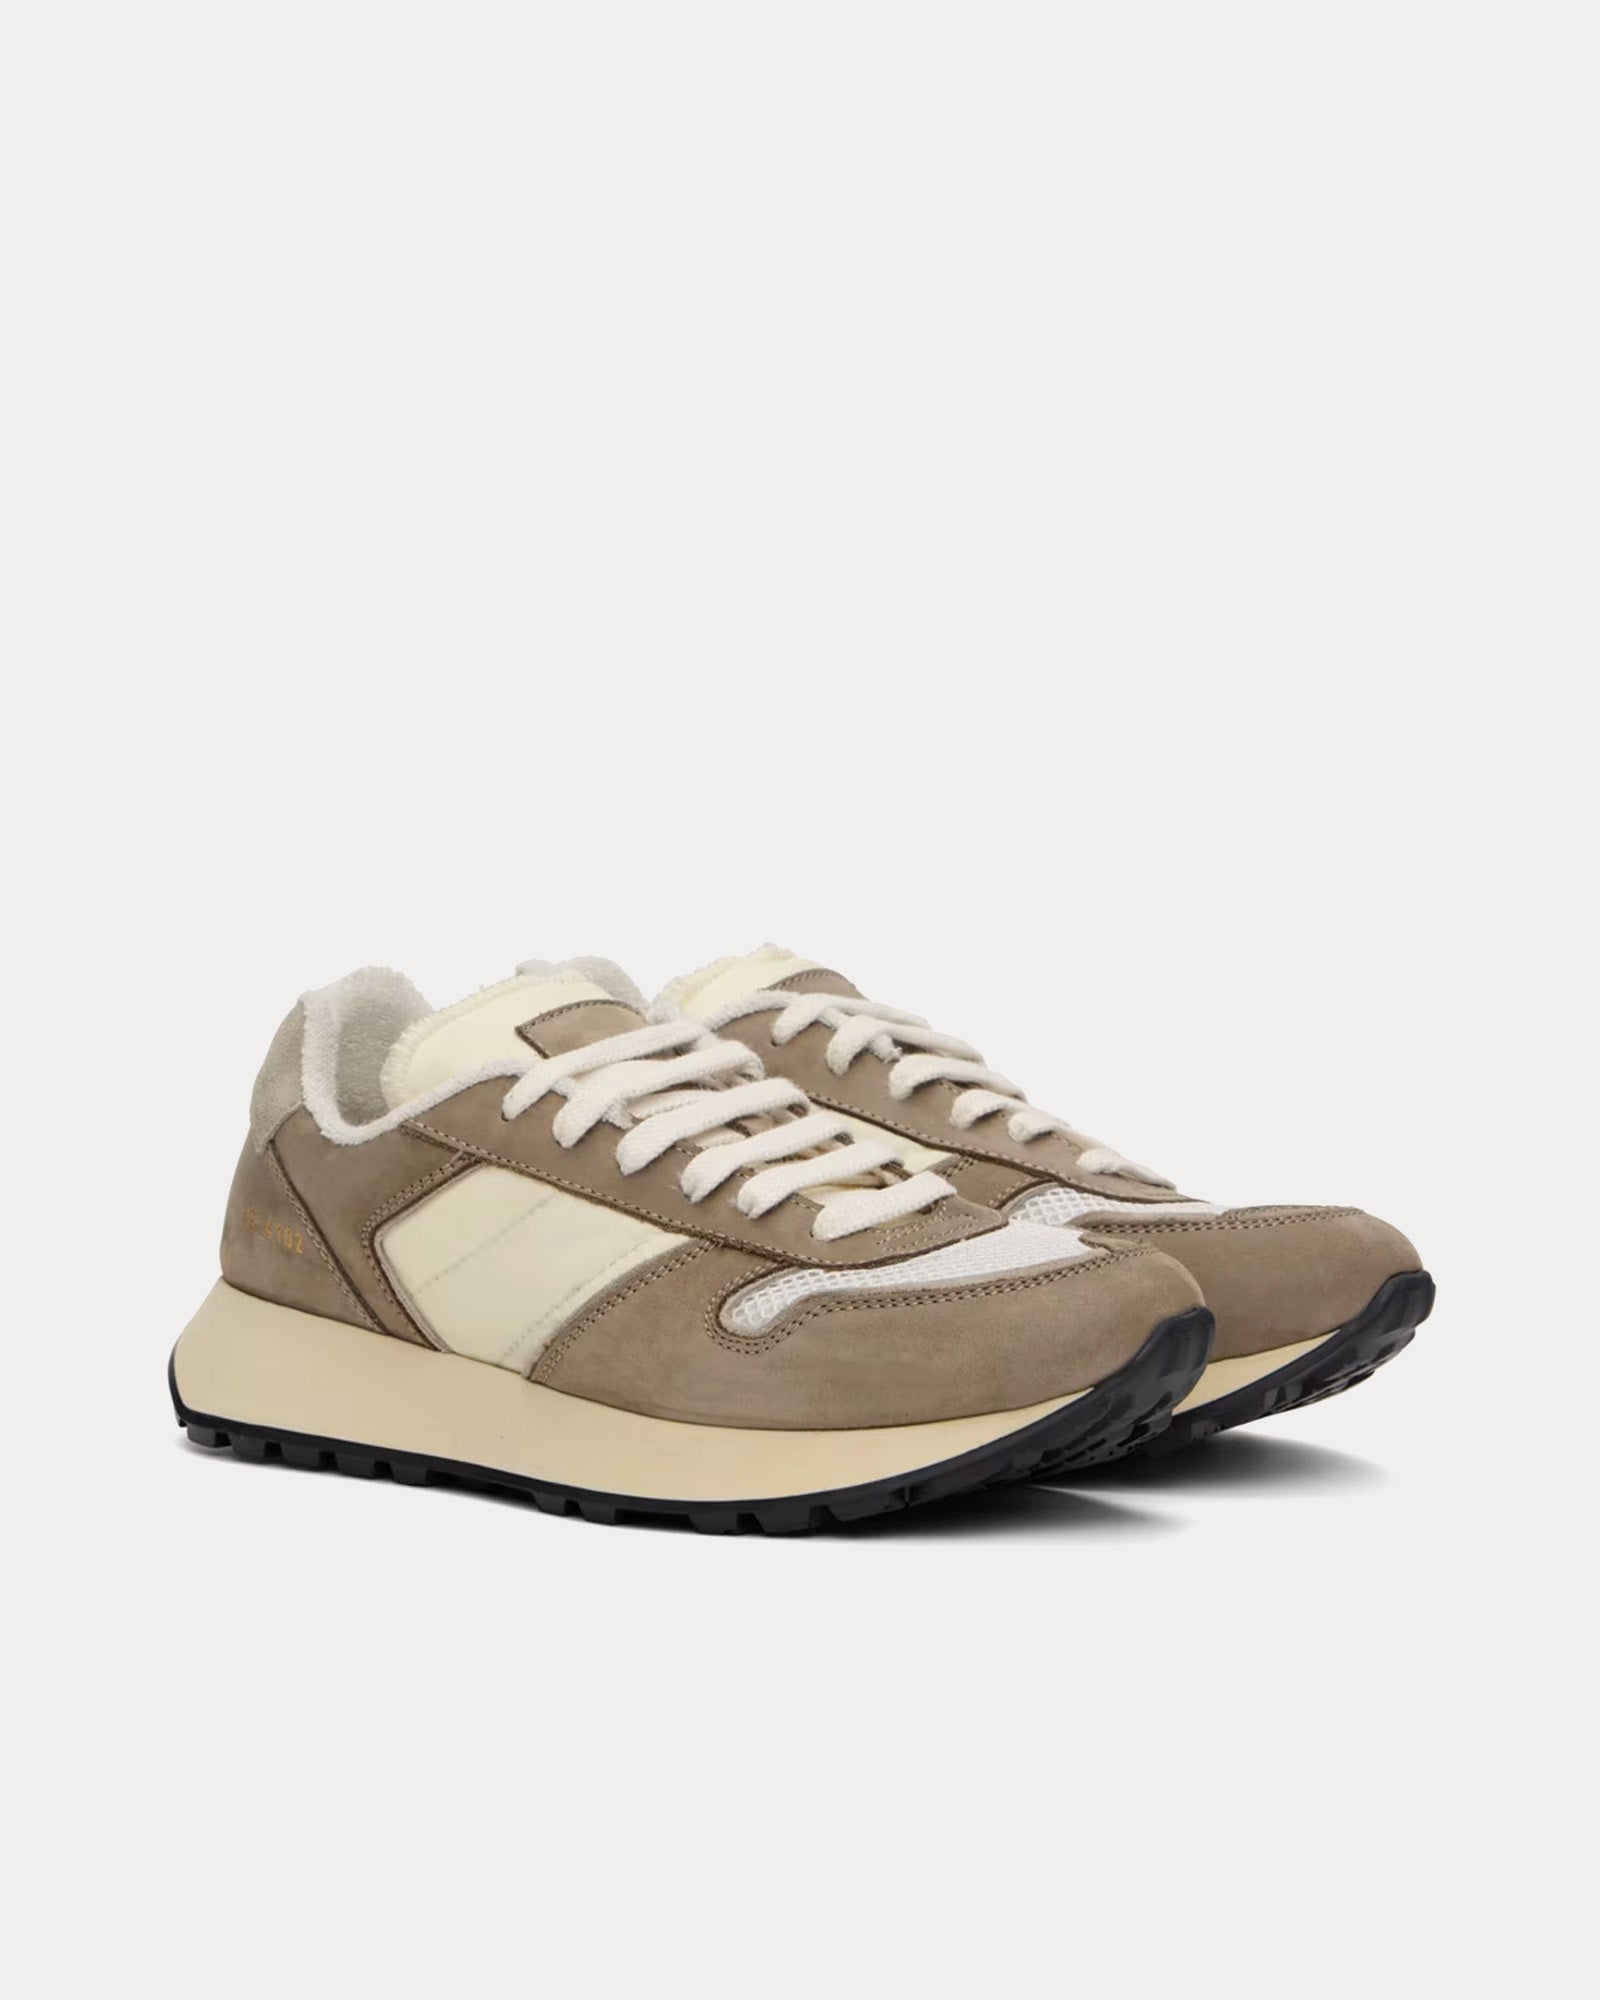 Common Projects - Track SS24 Brown / Off White Low Top Sneakers